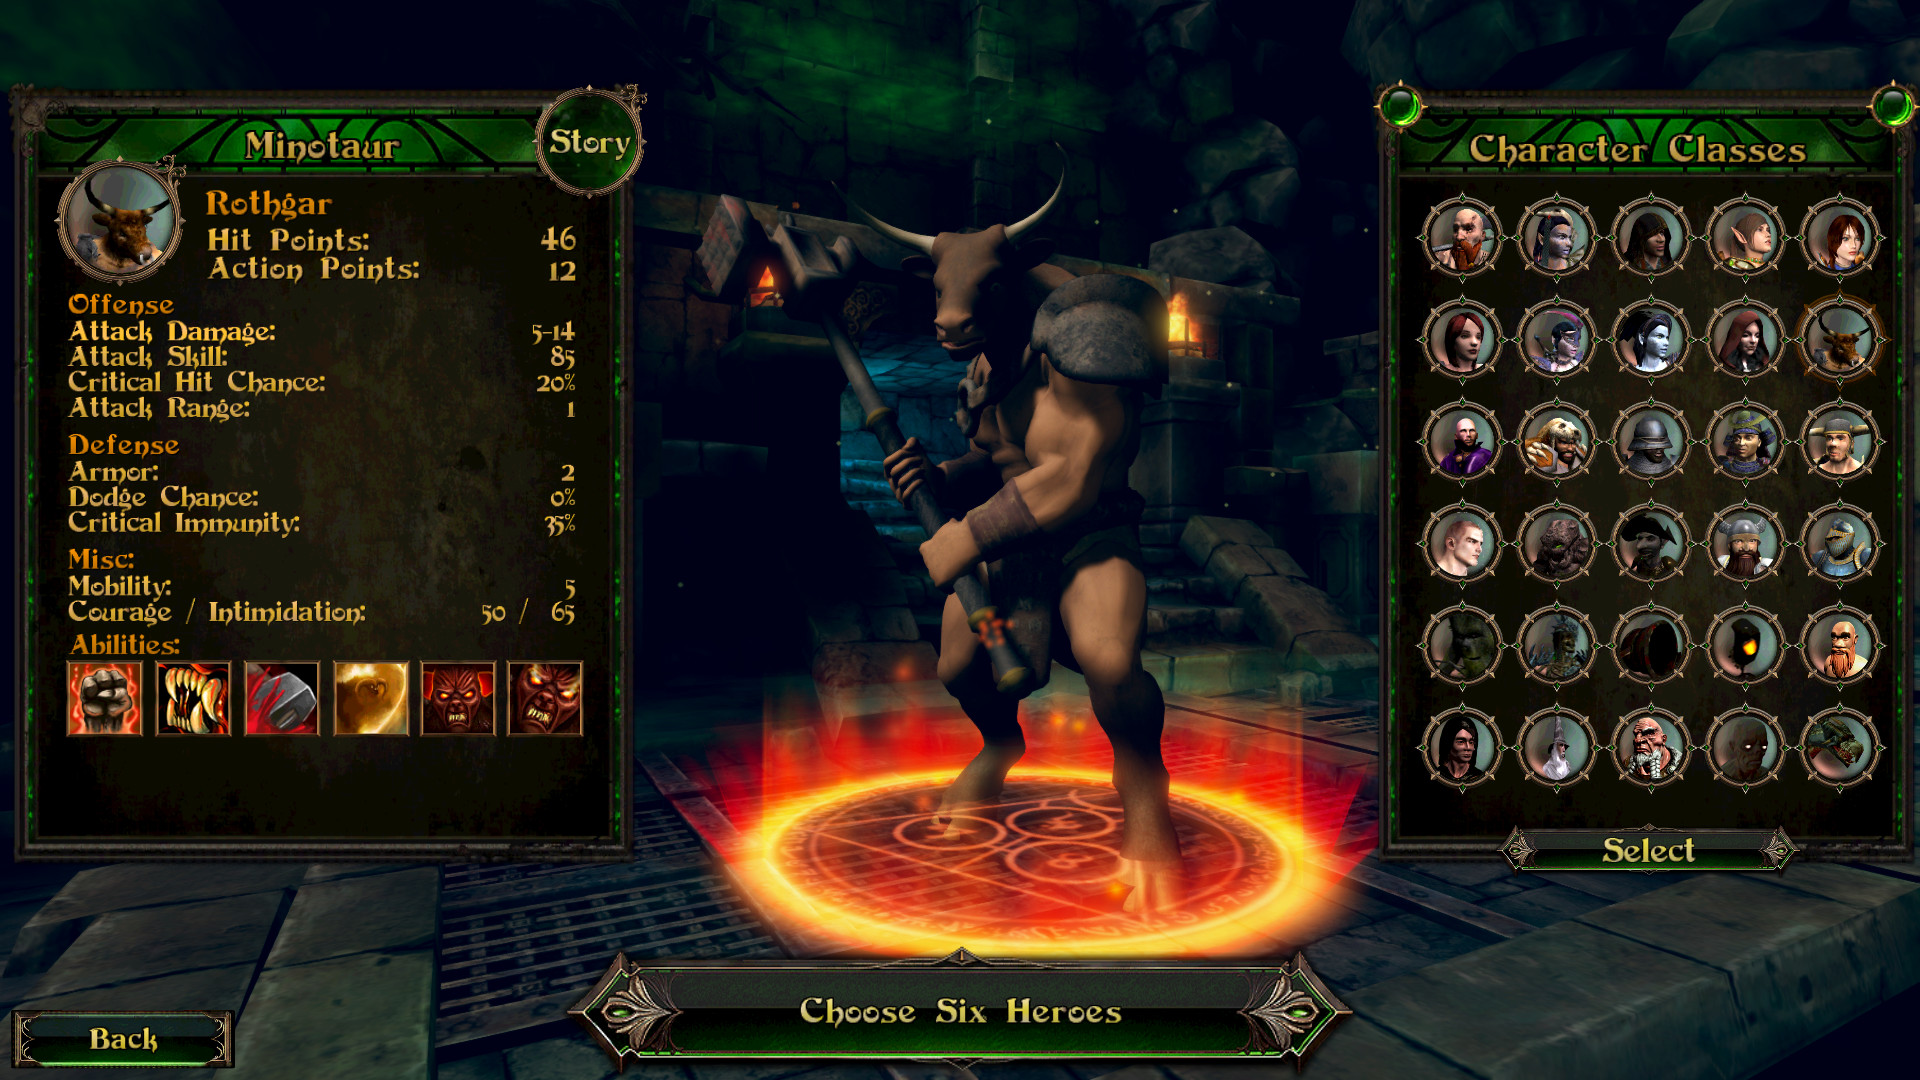 Demon's Rise - Lords of Chaos on Steam